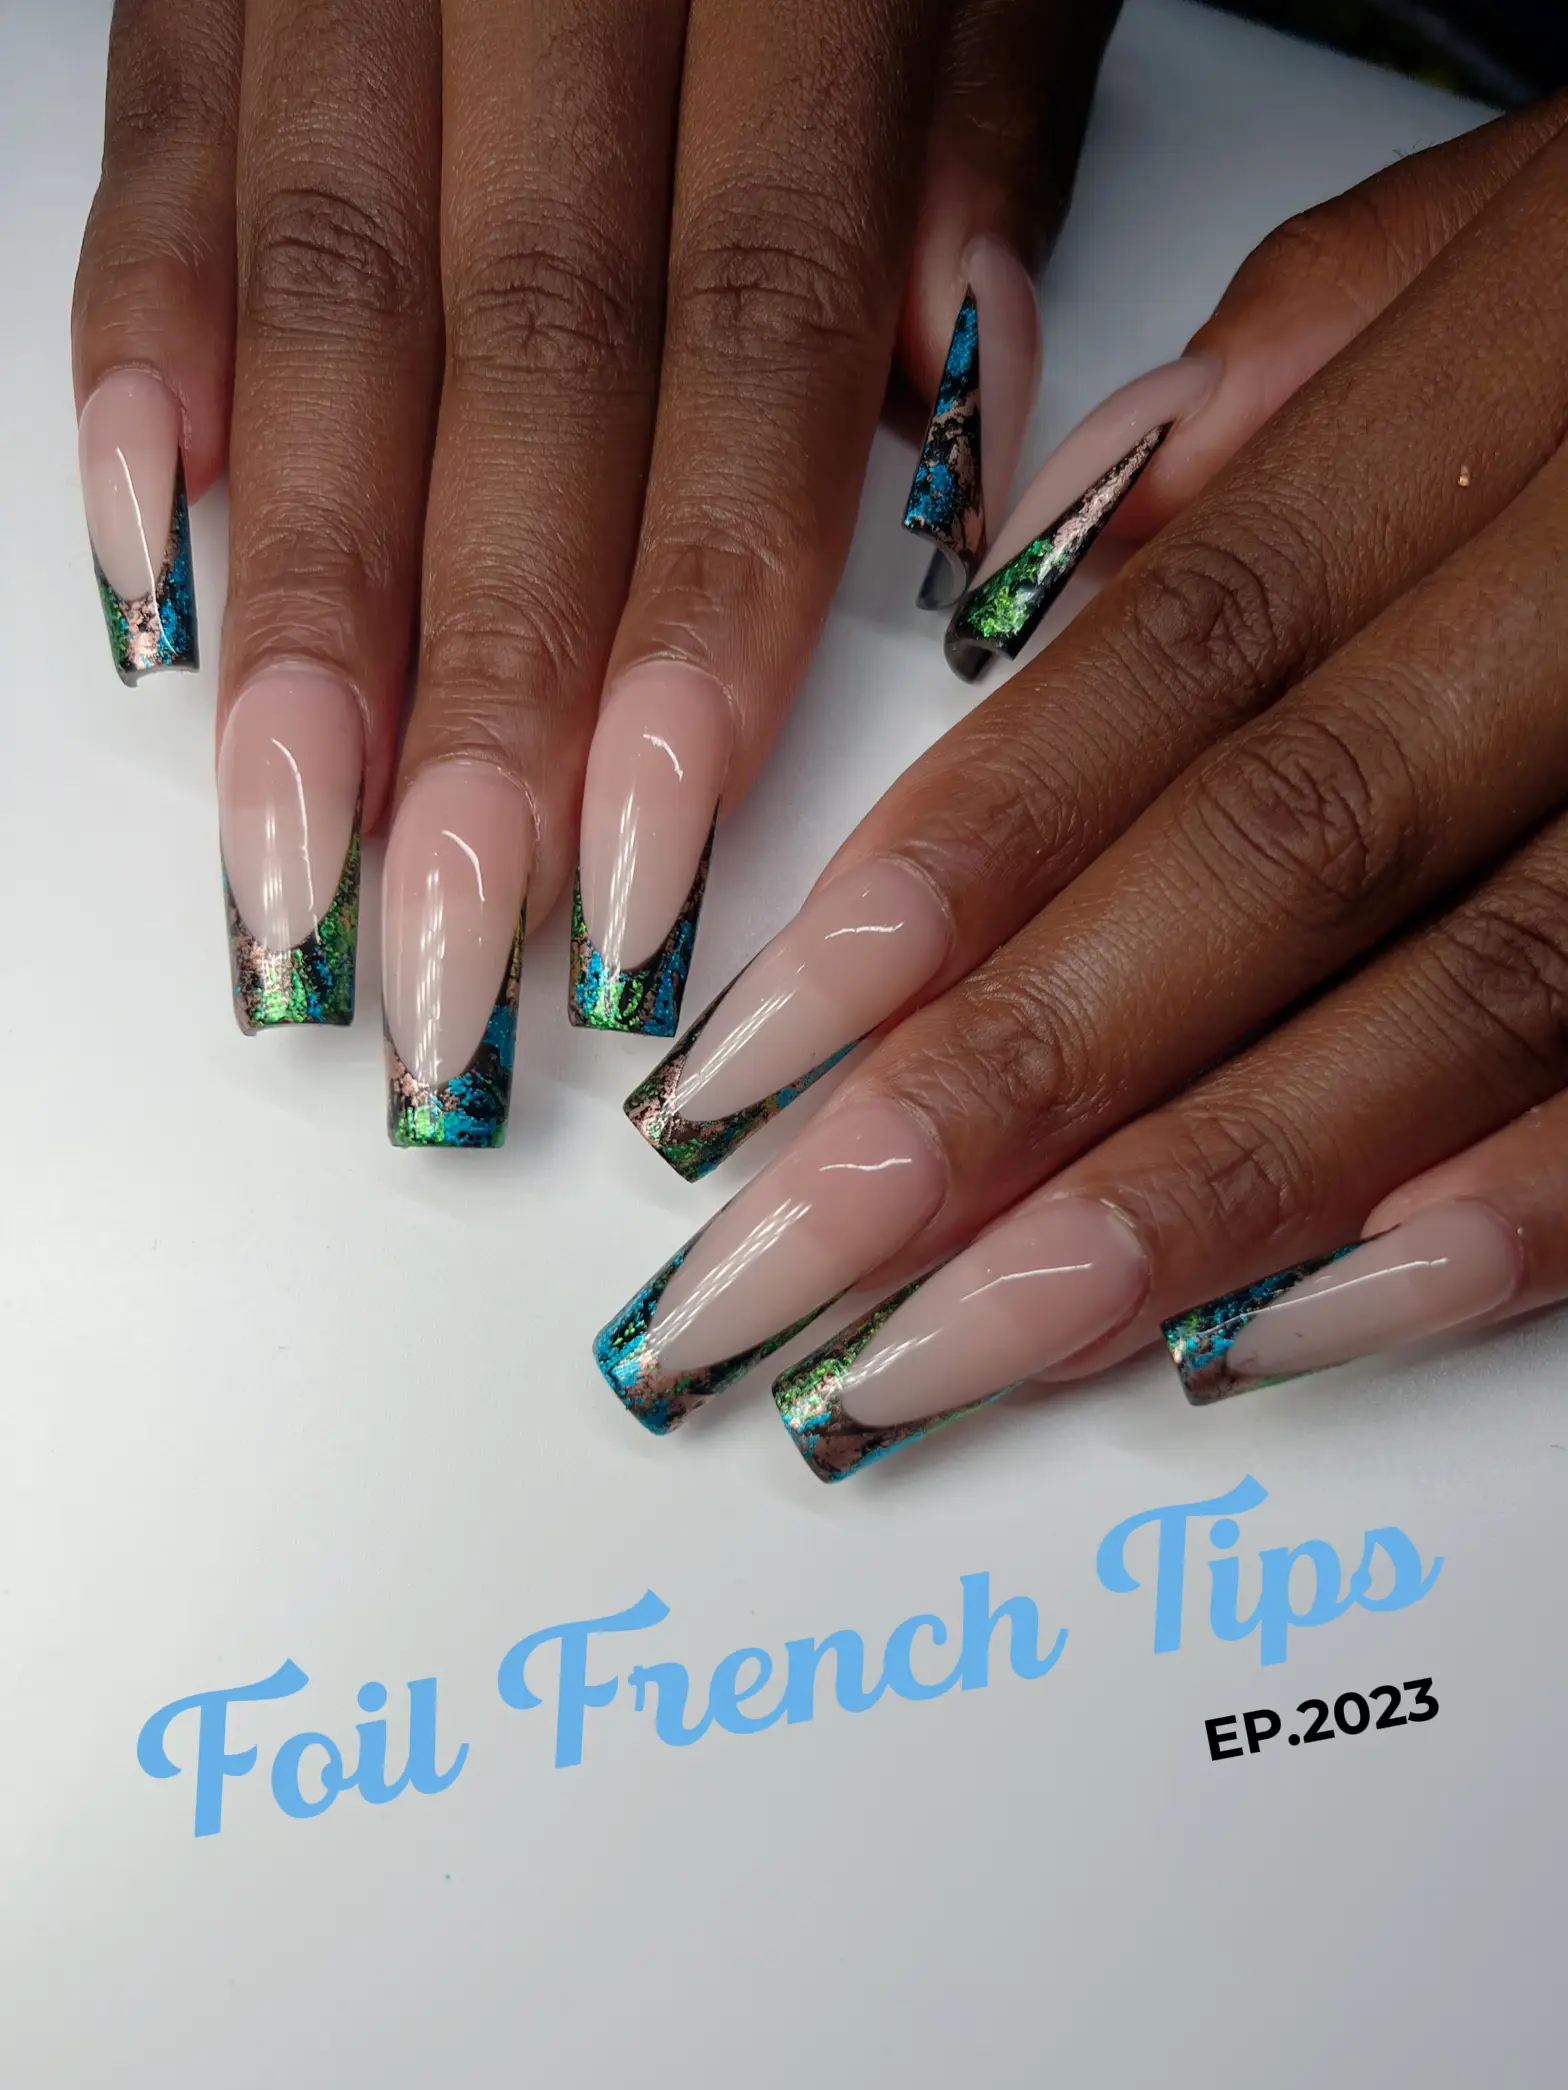 Foil Frenchies for the win 🙌🏼, Gallery posted by LV Nail Artist